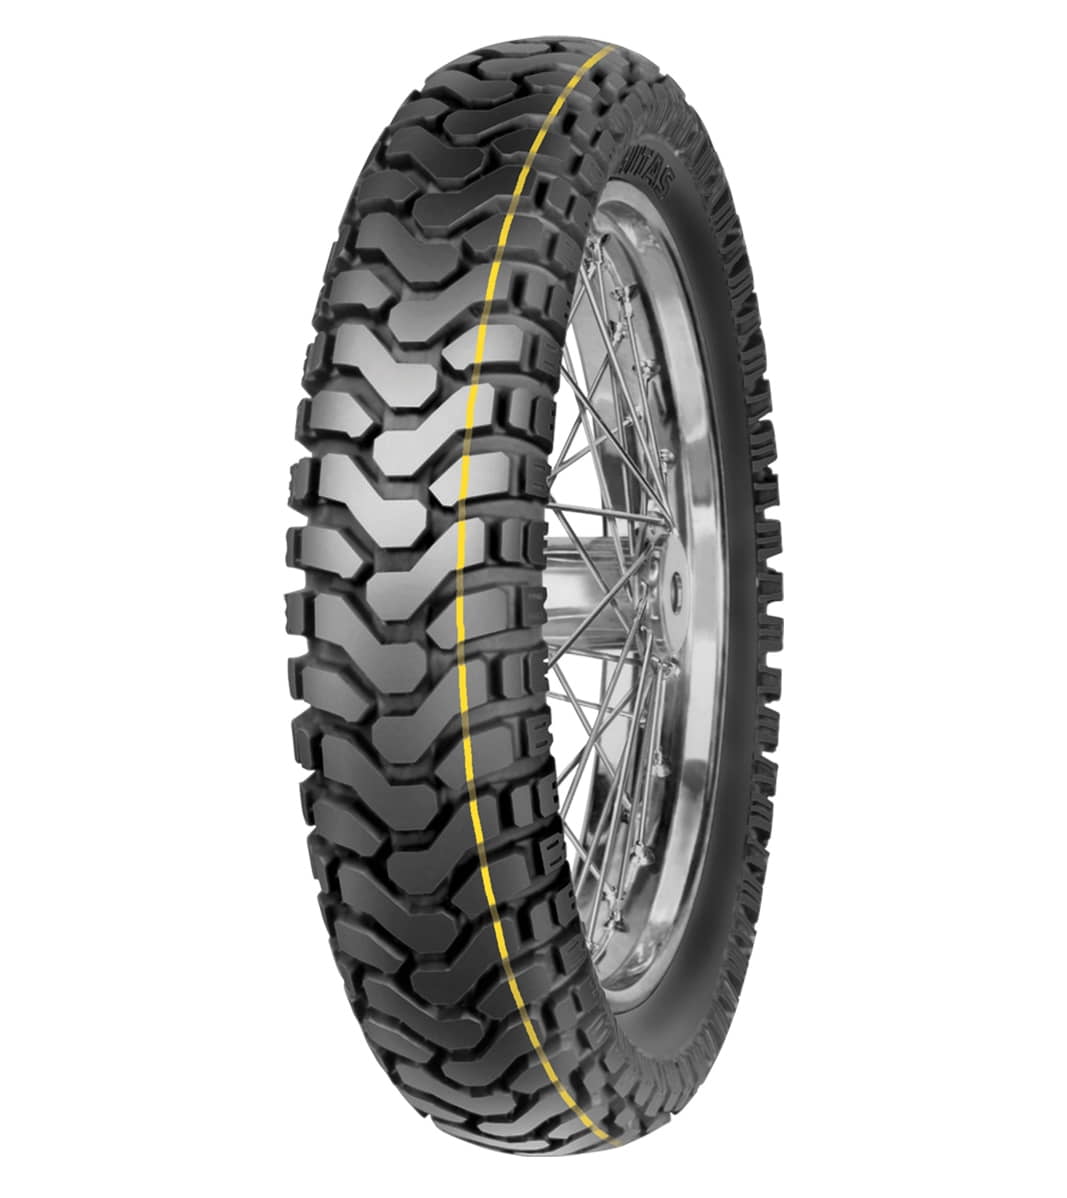 Mitas E-07 ENDURO 150/70-18 Trail OFF Trail DAKAR 70T Yellow Tubeless Rear Tire, 224405, 150/70-18, Adventure Touring, E Series, E-07 Enduro, Rear, Trail, Trail OFF, Tires - Imported and distributed in North & South America by Lindeco Genuine Powersports - Premier Powersports Equipment and Accessories for Motorcycle Enthusiasts, Professional Riders and Dealers.